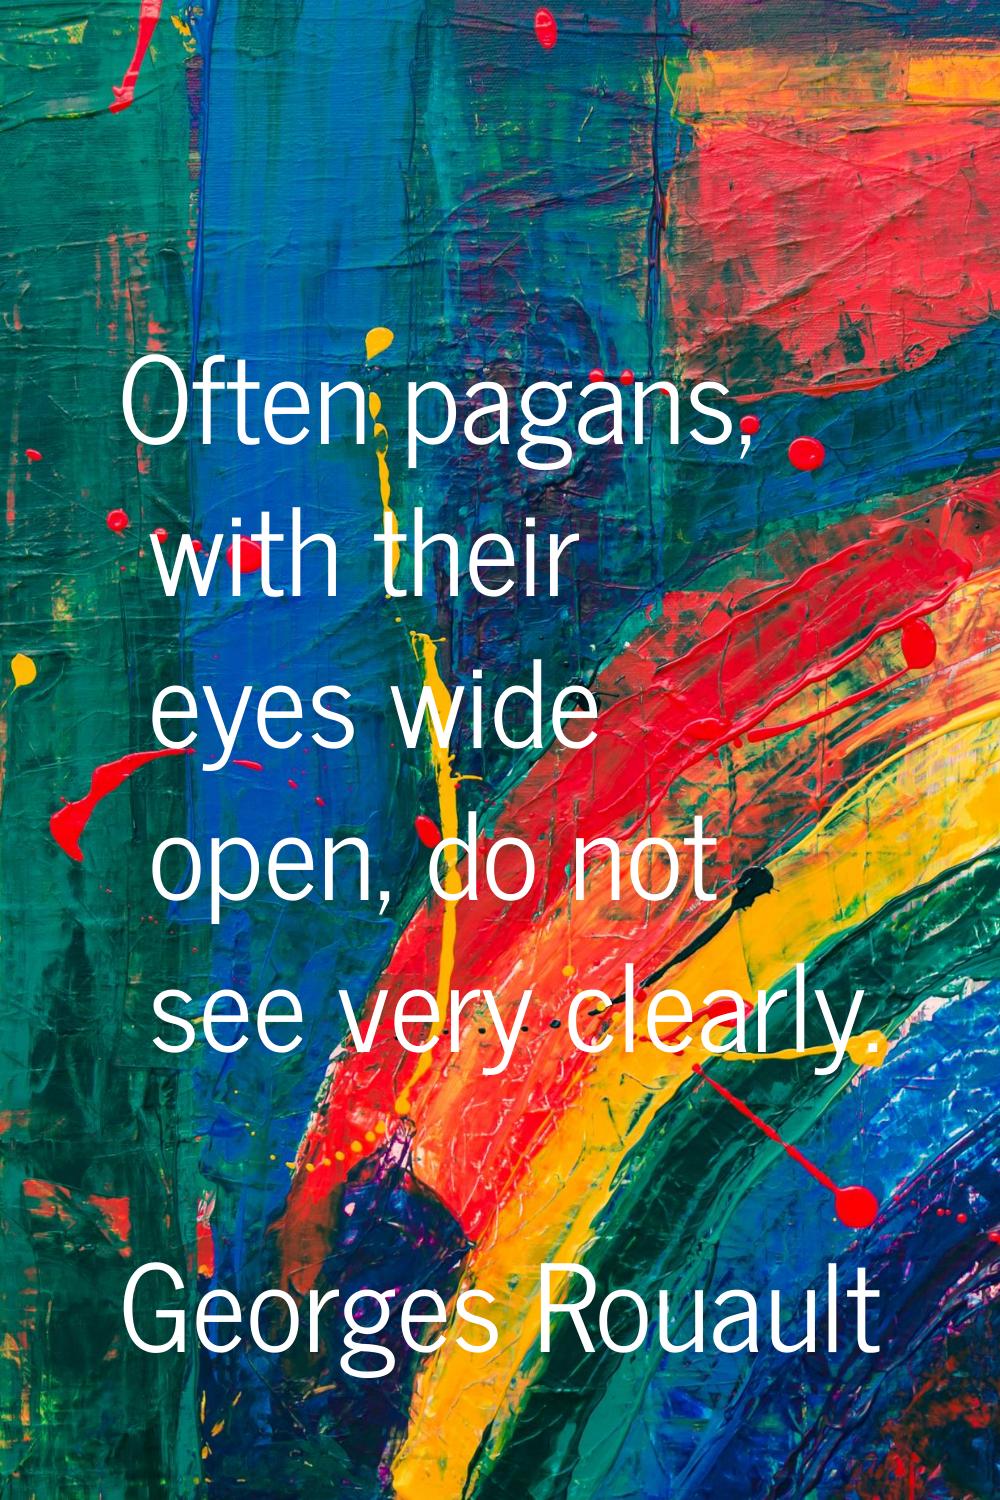 Often pagans, with their eyes wide open, do not see very clearly.